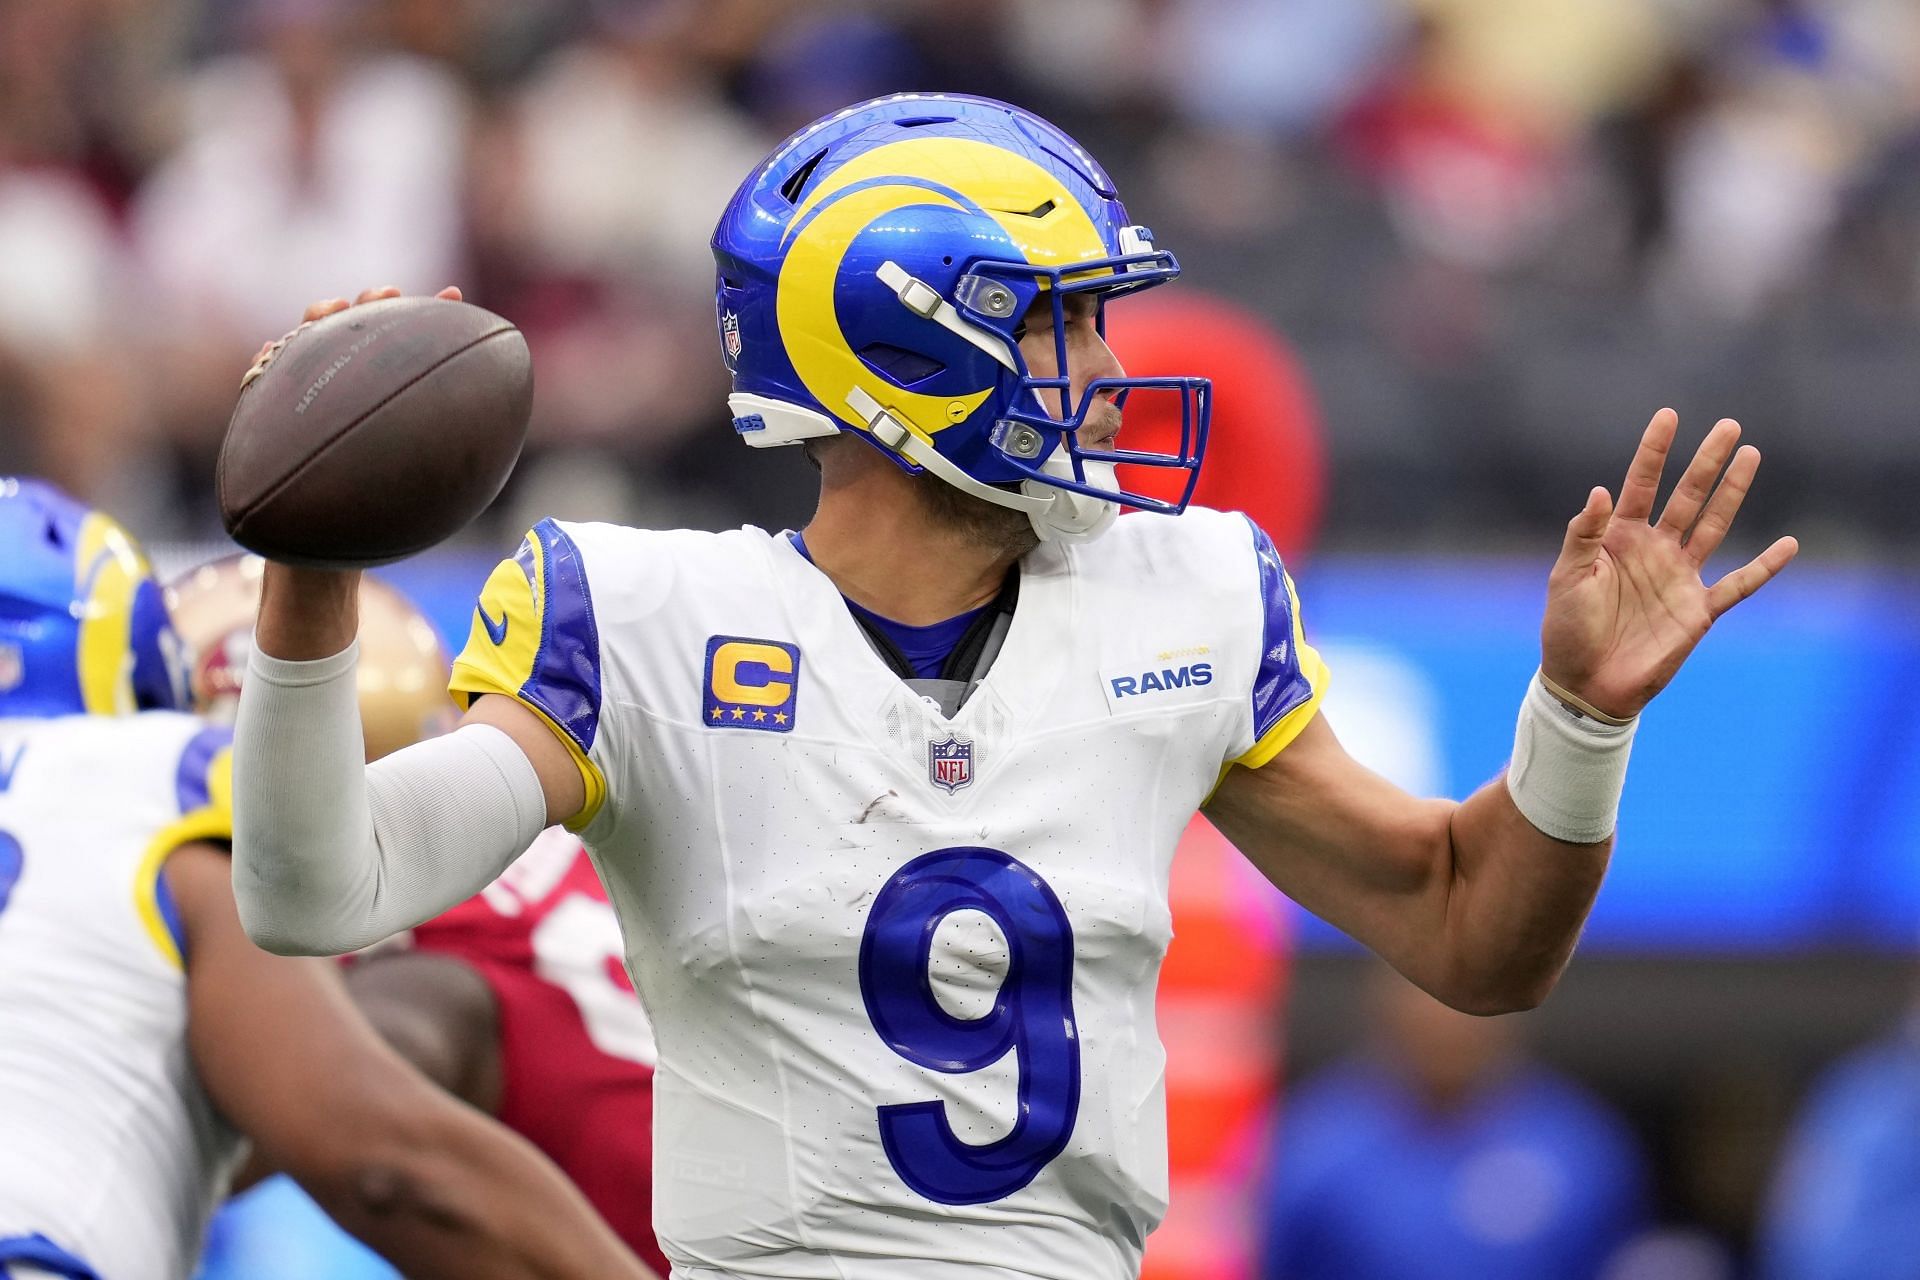 Rams vs. Colts: How to Watch the Week 4 NFL Game Online Today